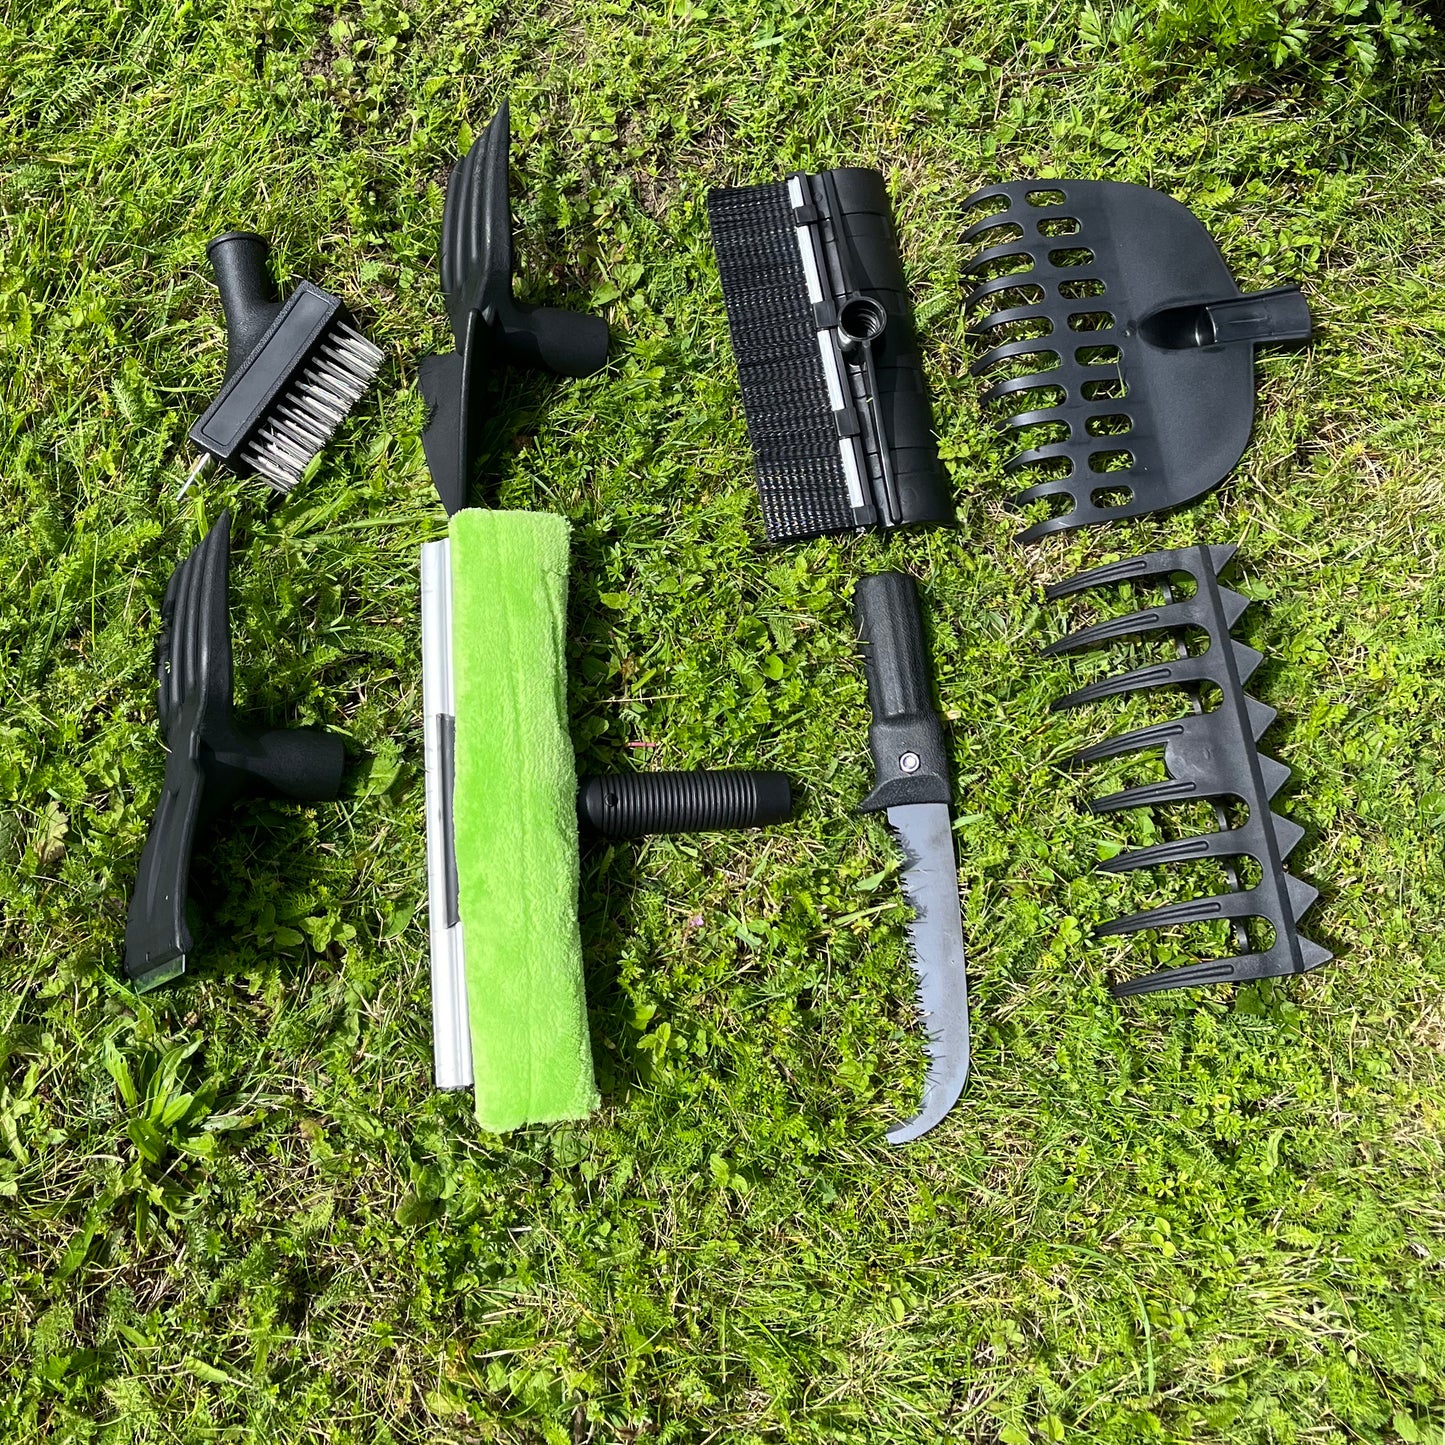 Apple Picker Fruit Harvester with 9 Interchangeable Tool Heads